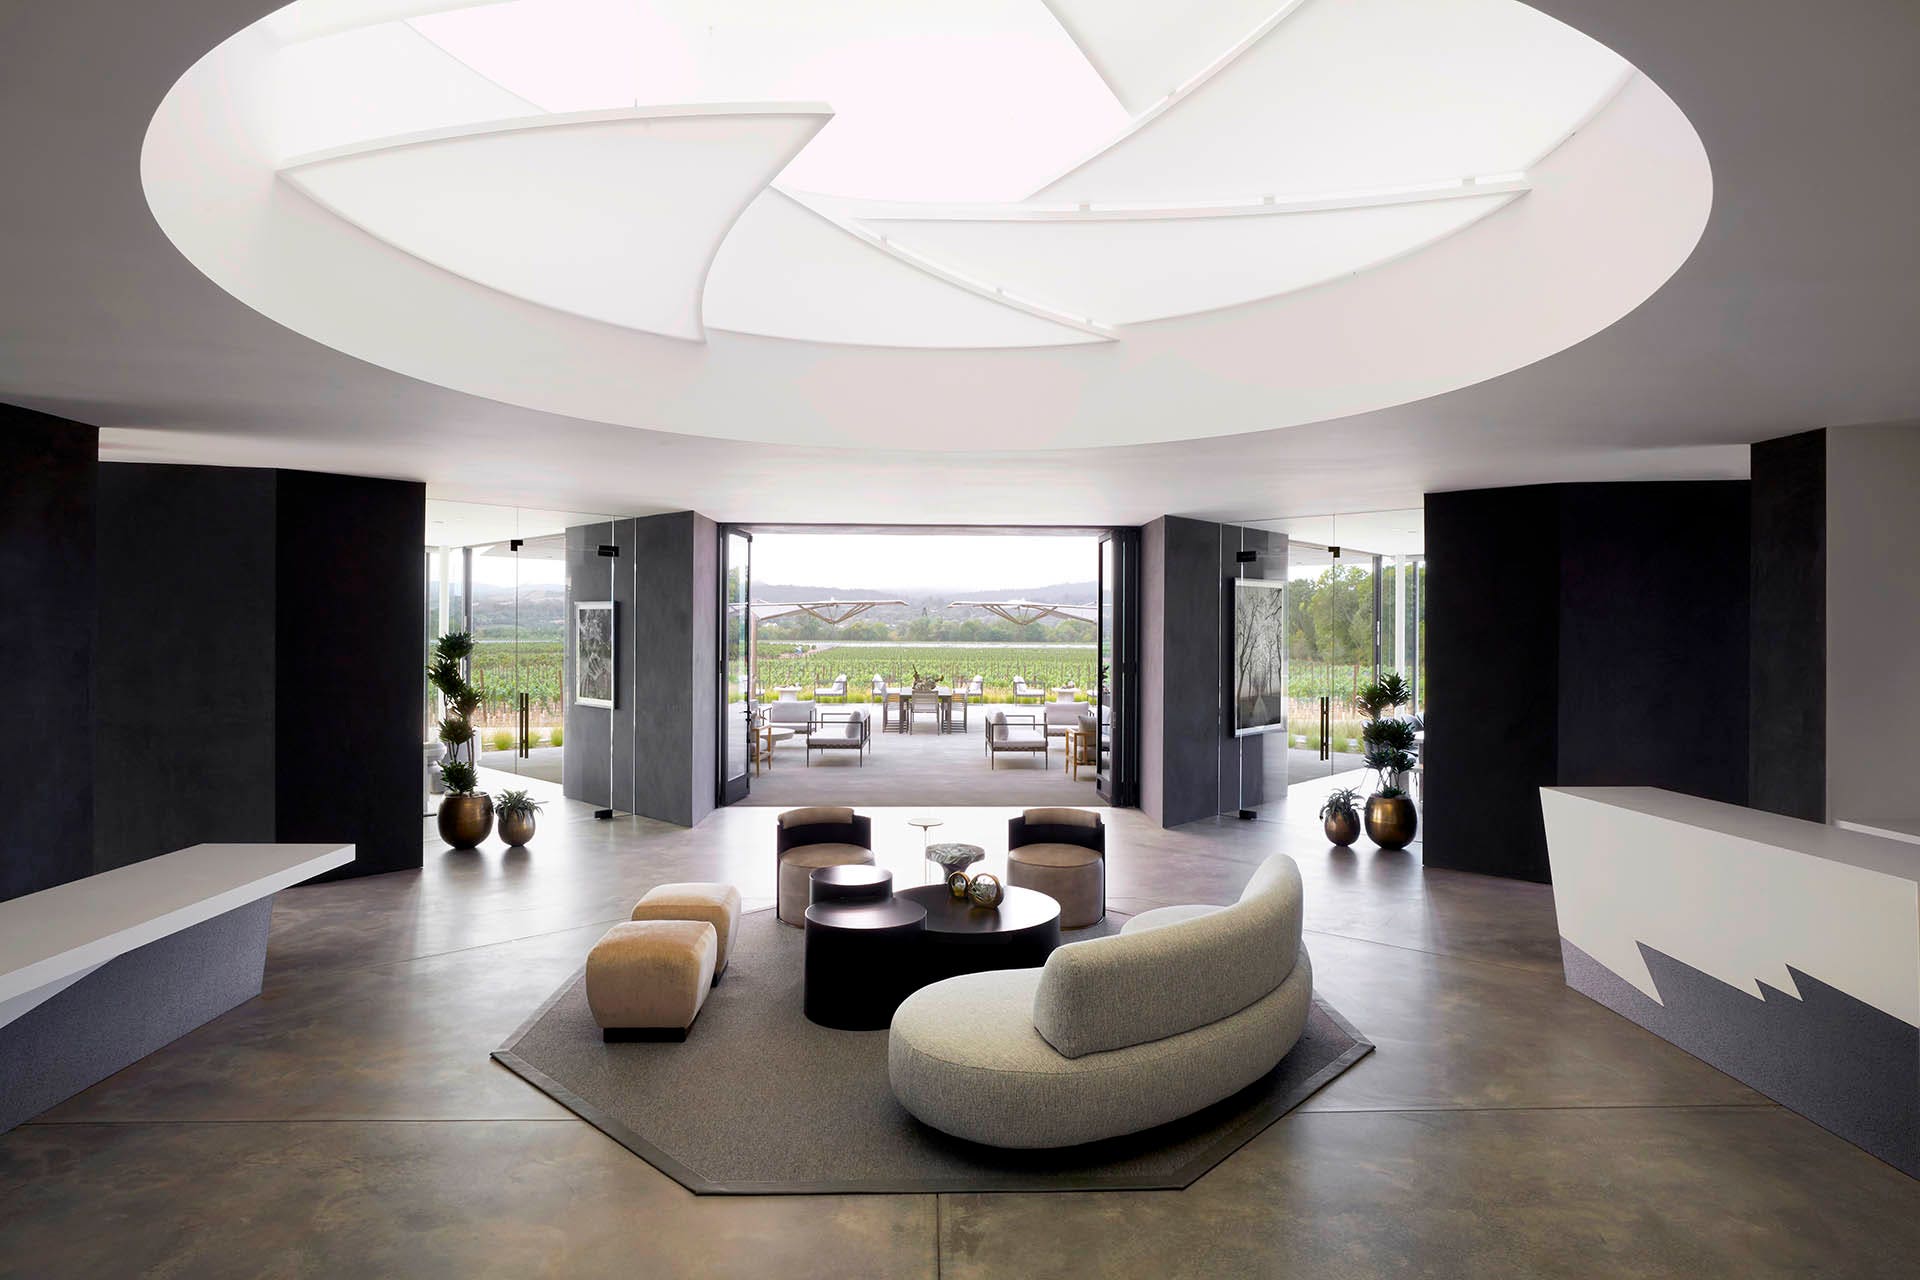 Interior of Aperture, designed by Signum, with ceiling accent meant to evoke a photo lens / Photo by Aubrie Pick